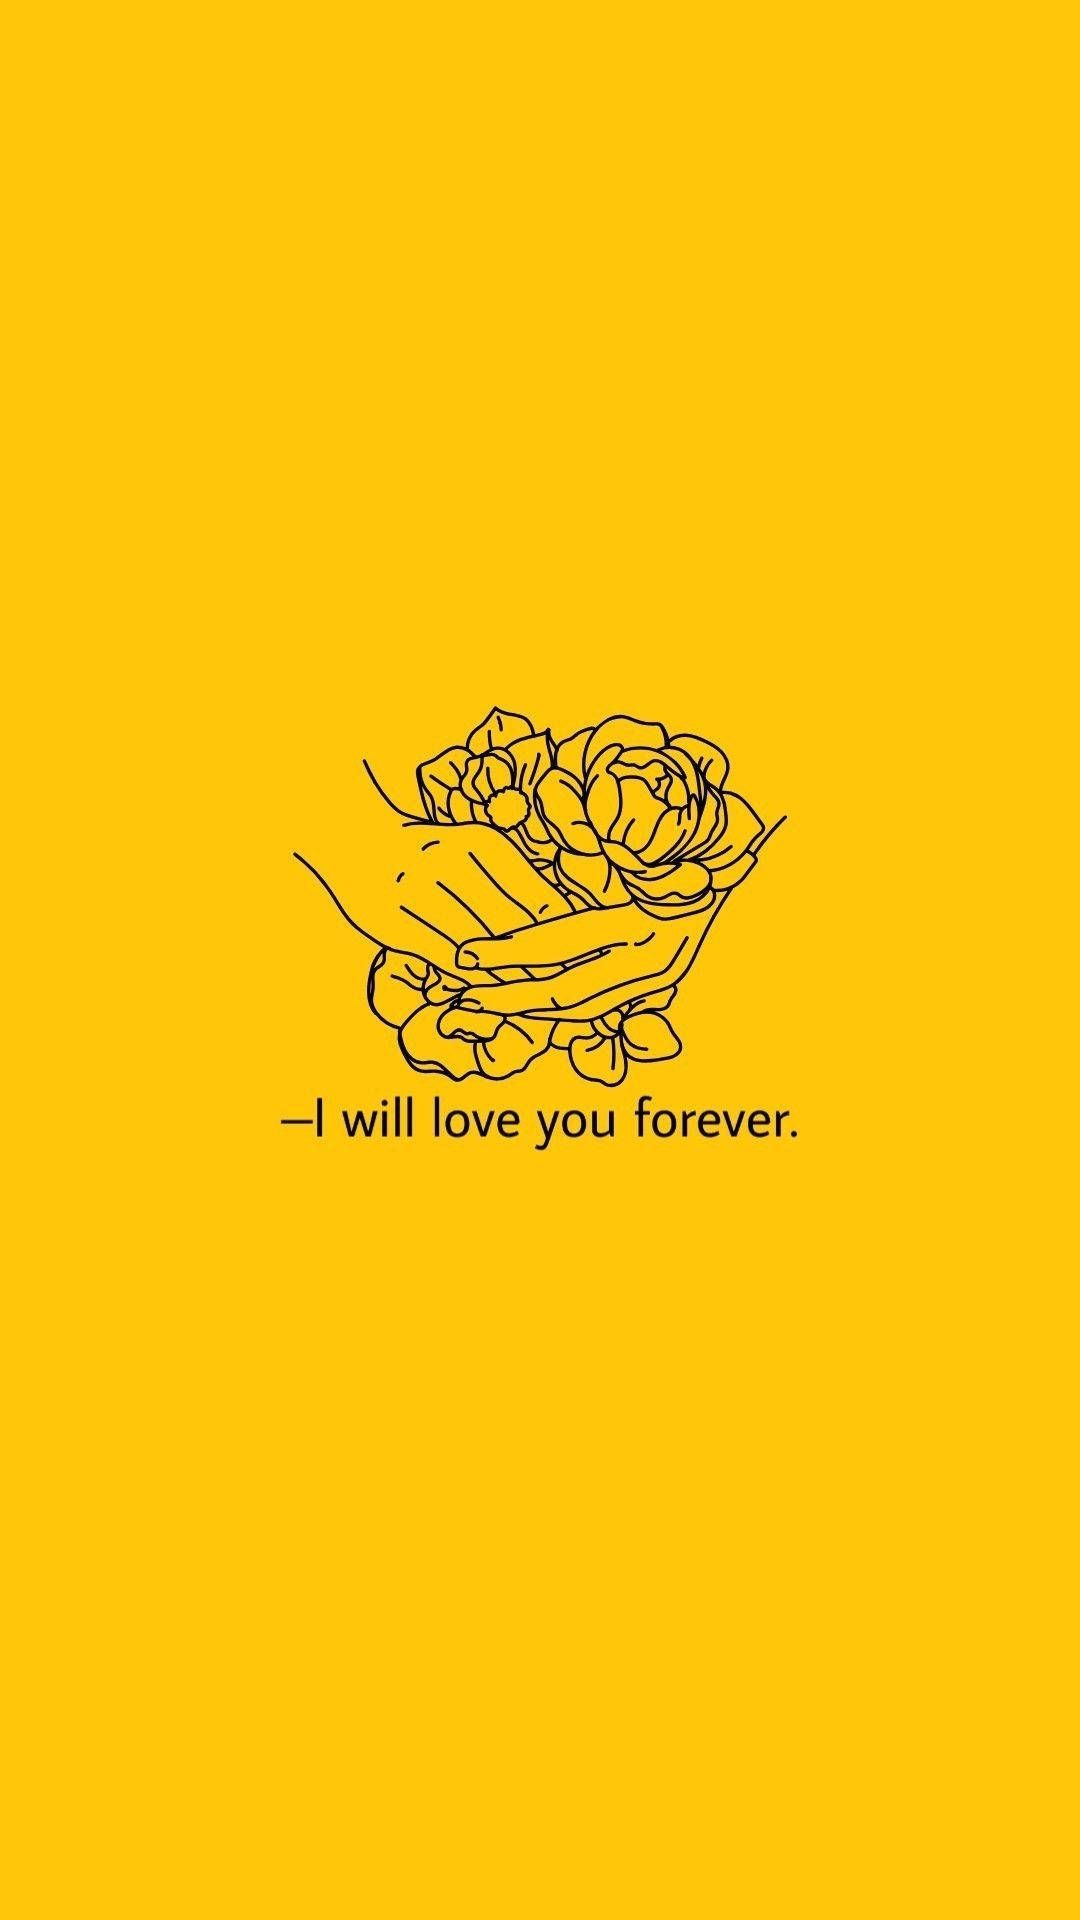 Iphone wallpaper, yellow aesthetic, love you forever - Love